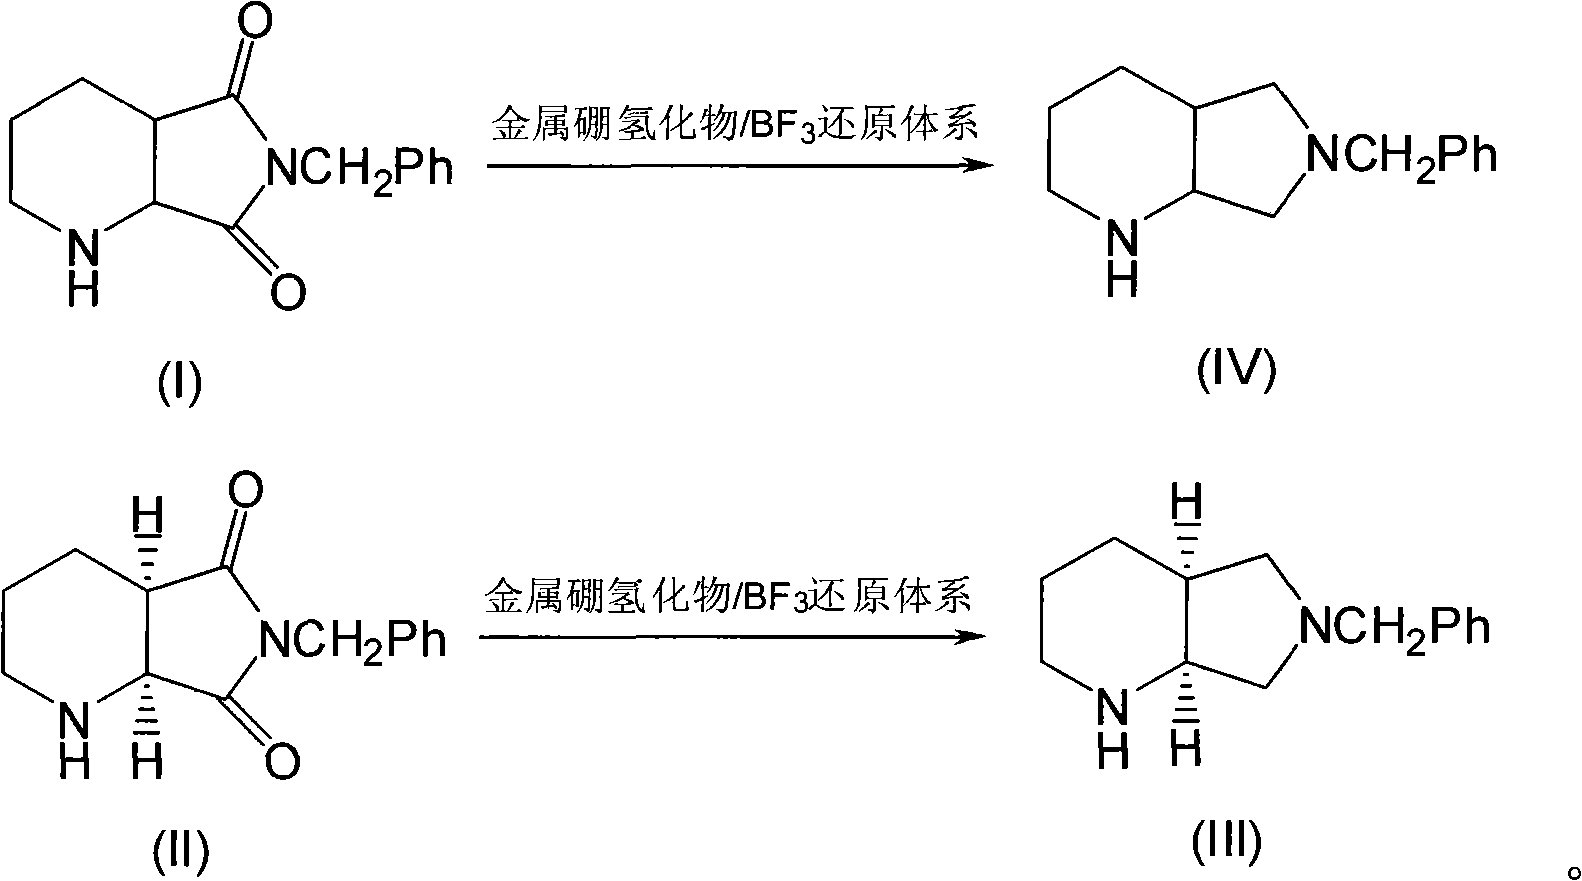 Method for reducing 8-benzyl-2,8-diazabicyclo[4,3,0]nonane and chiral isomer thereof